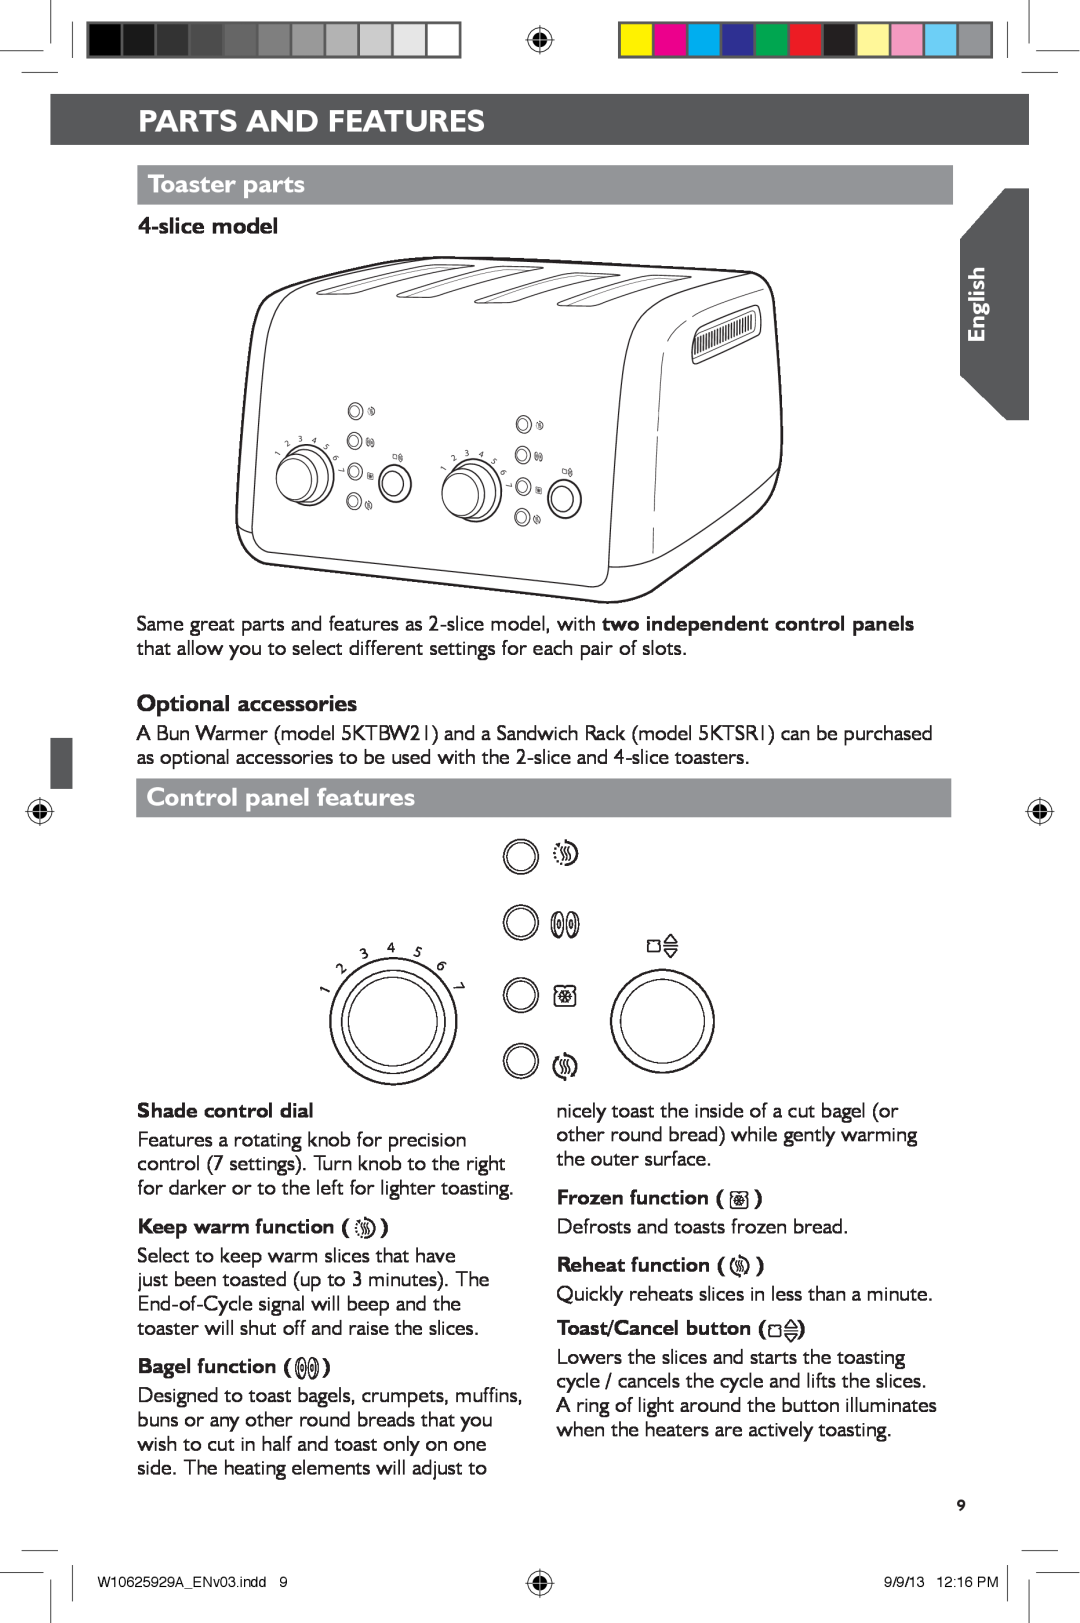 KitchenAid 5KMT421 Parts And Features, Toaster parts, Control panel features, slicemodel, English, Optional accessories 